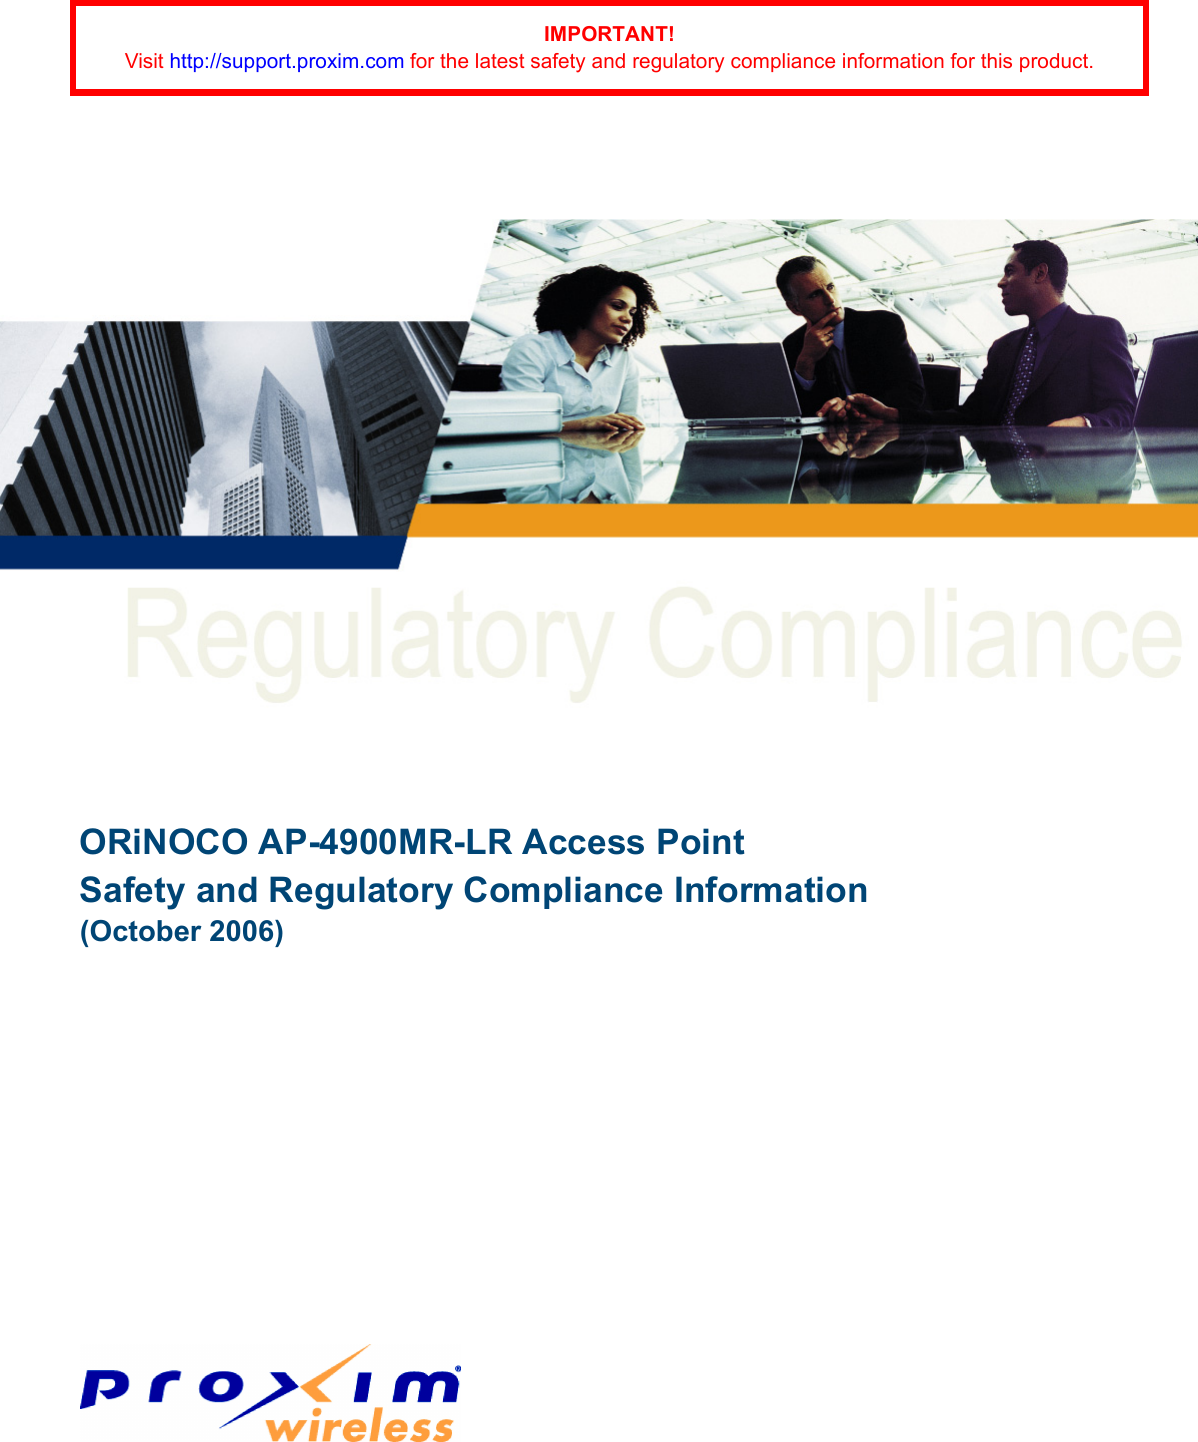 ORiNOCO AP-4900MR-LR Access Point Safety and Regulatory Compliance Information(October 2006)IMPORTANT!Visit http://support.proxim.com for the latest safety and regulatory compliance information for this product.